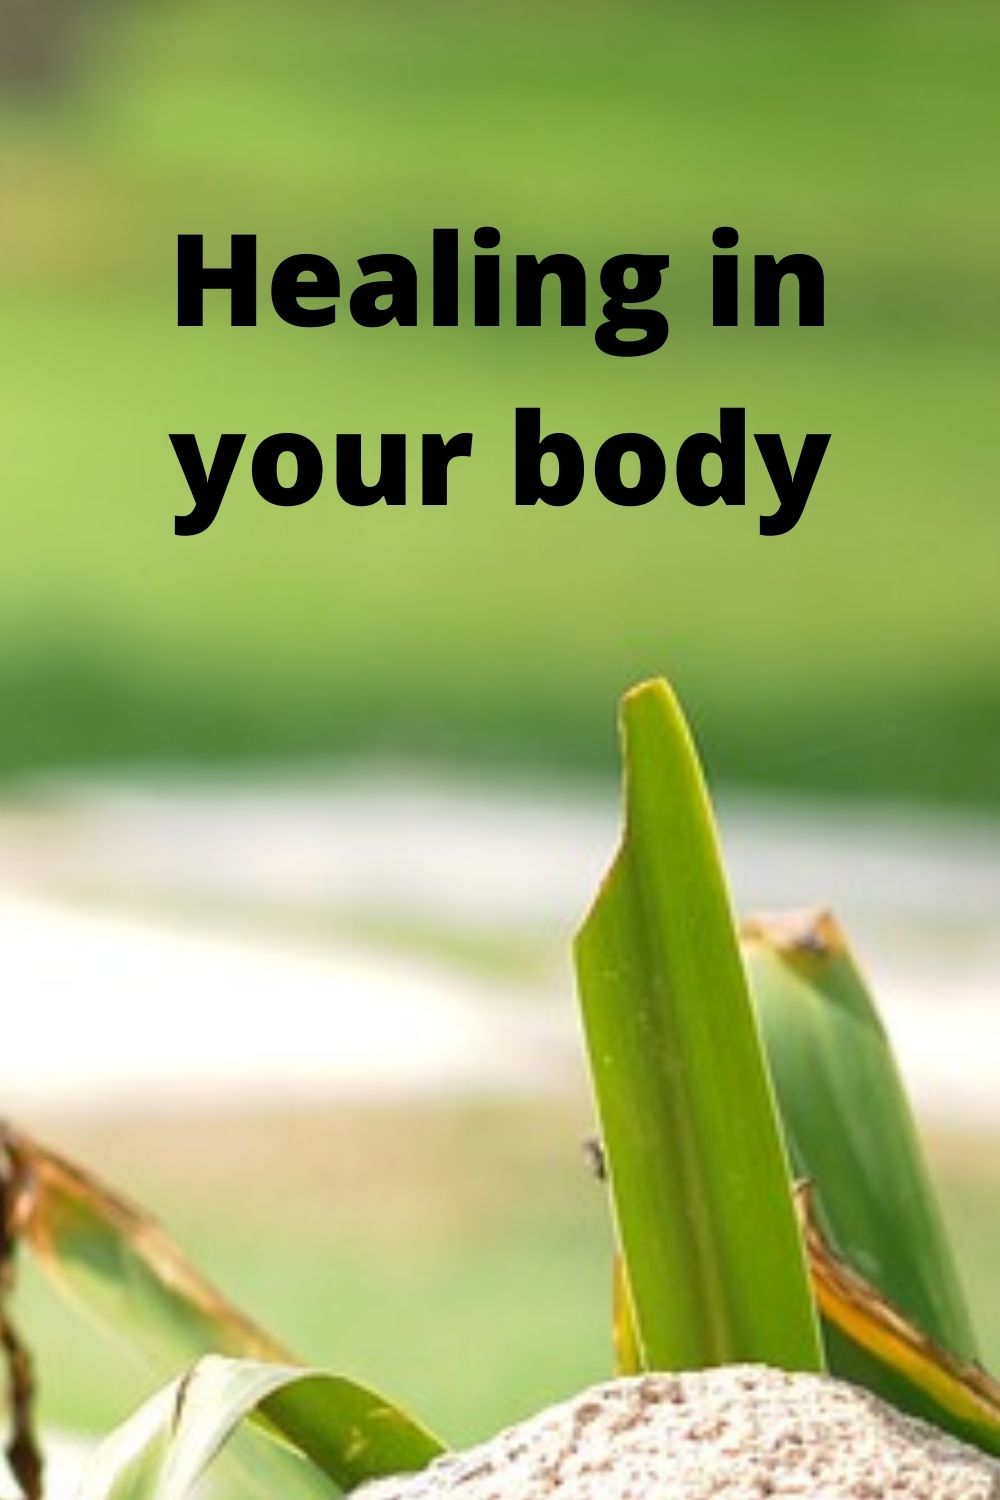 Sound health and wellness: Healing in your Body